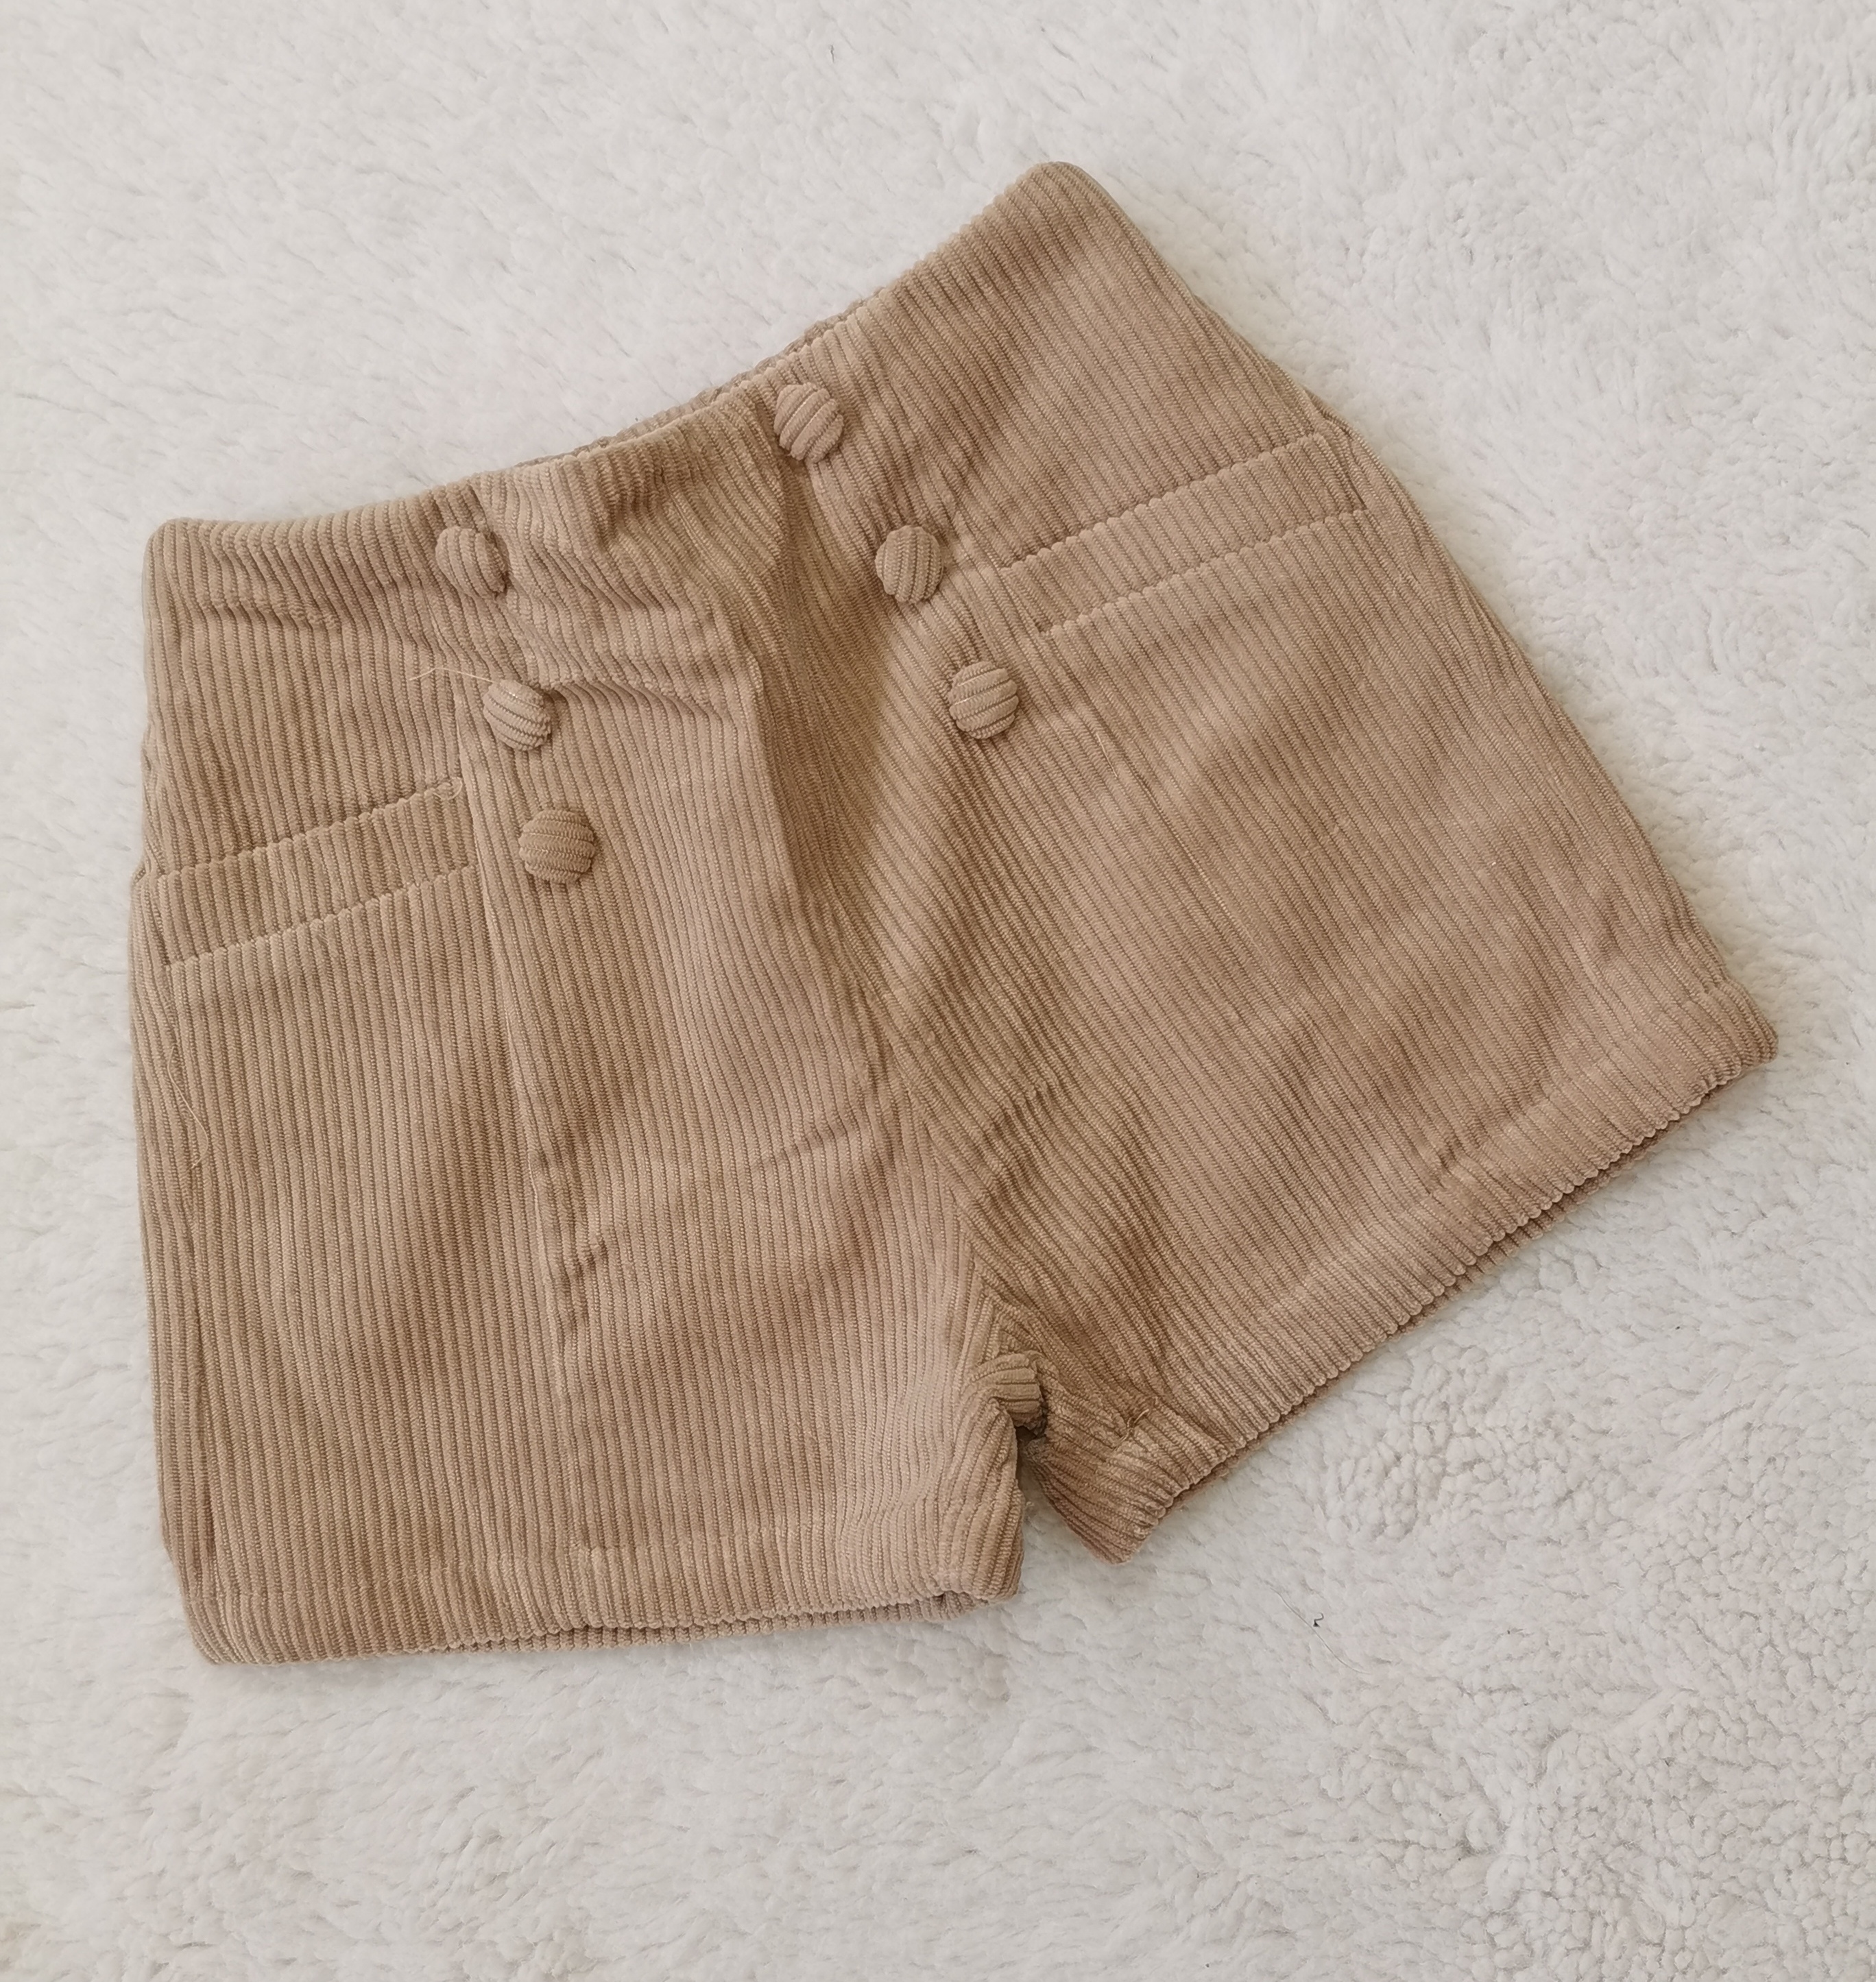 SHORTS ATIVO 22/23 MONOC. CORDURY WITH BUTTONS GIRL